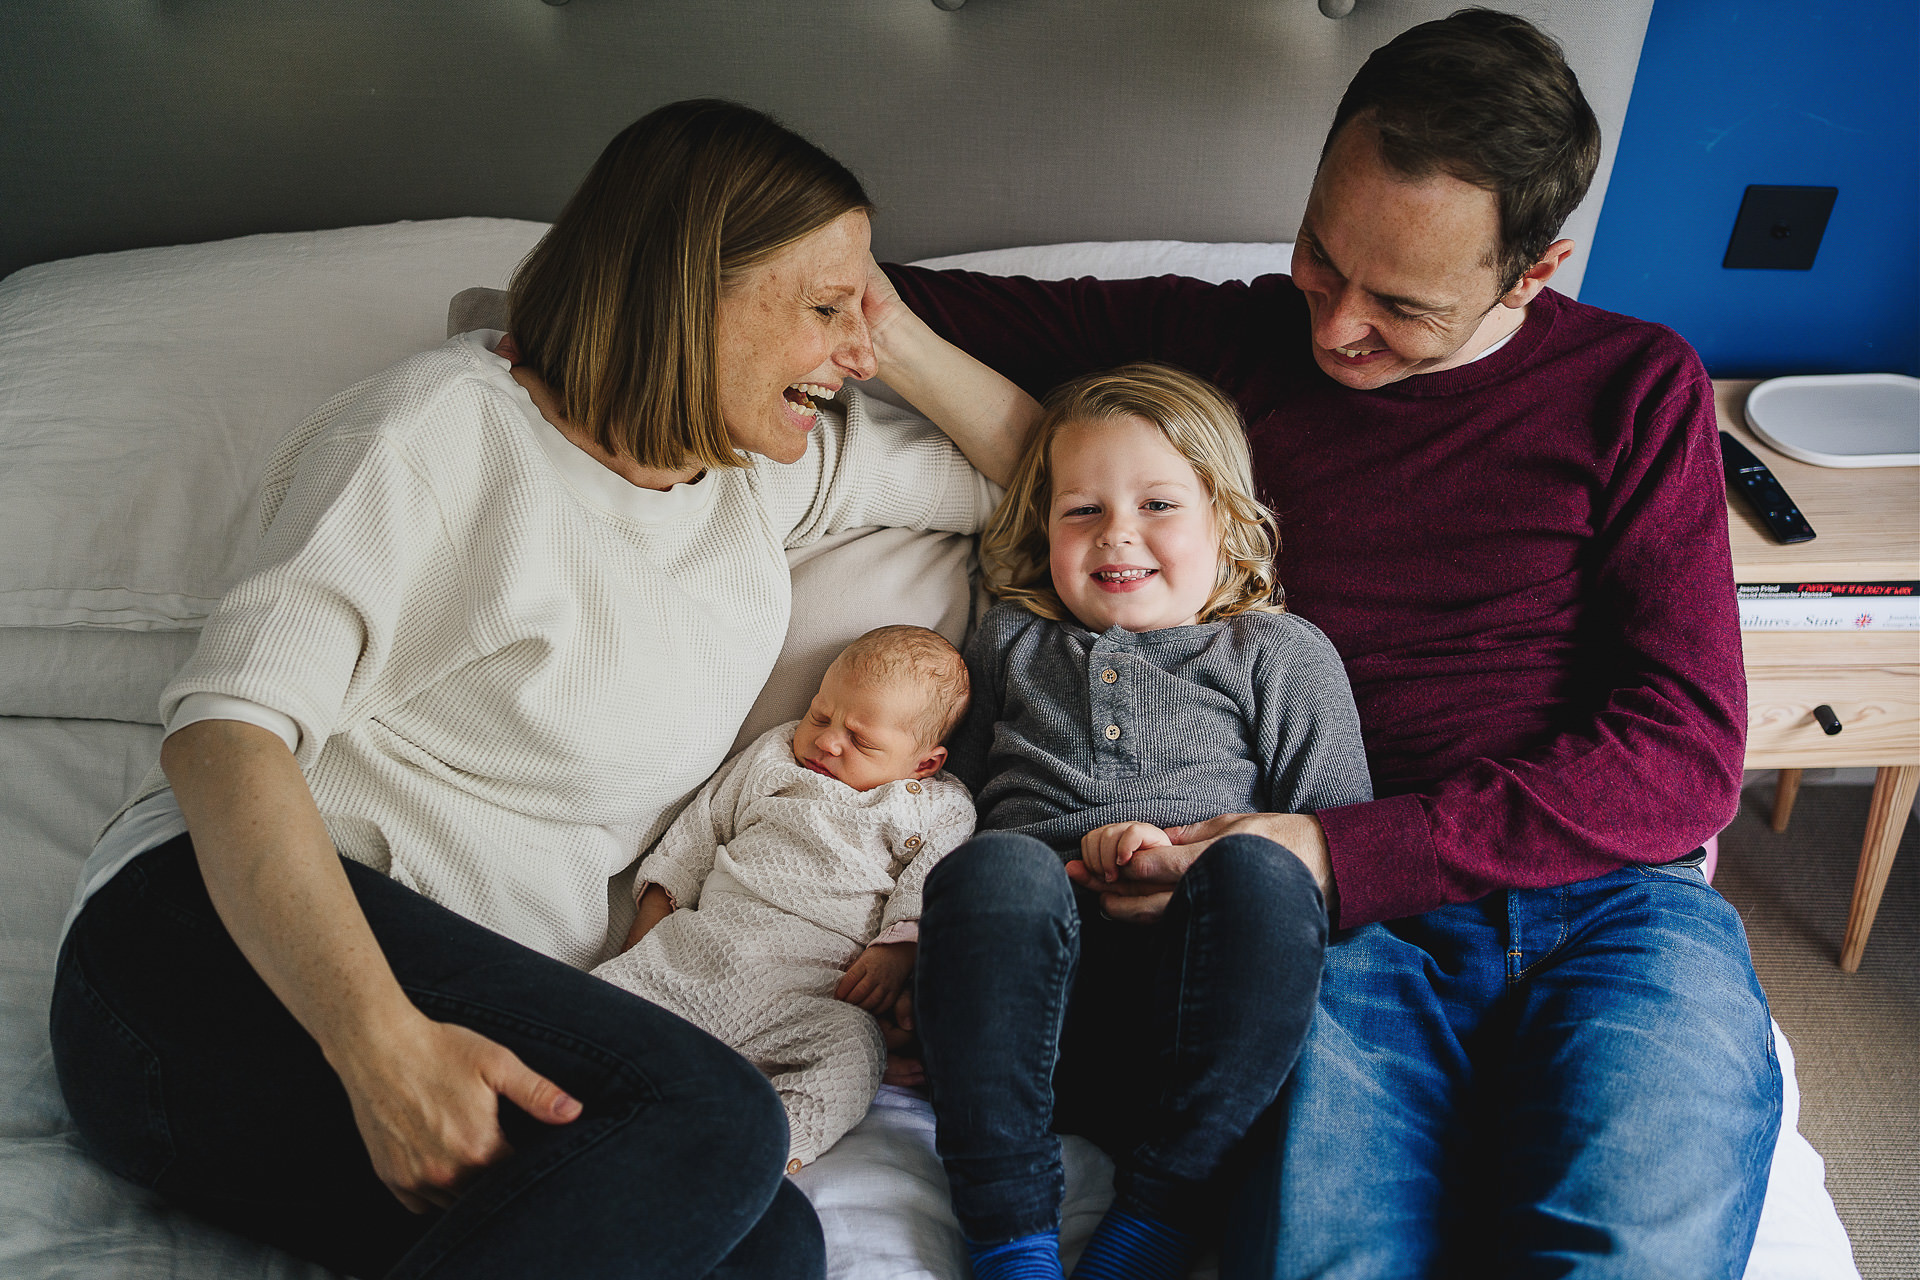 Family photography at home, with a family cuddling on a bed together